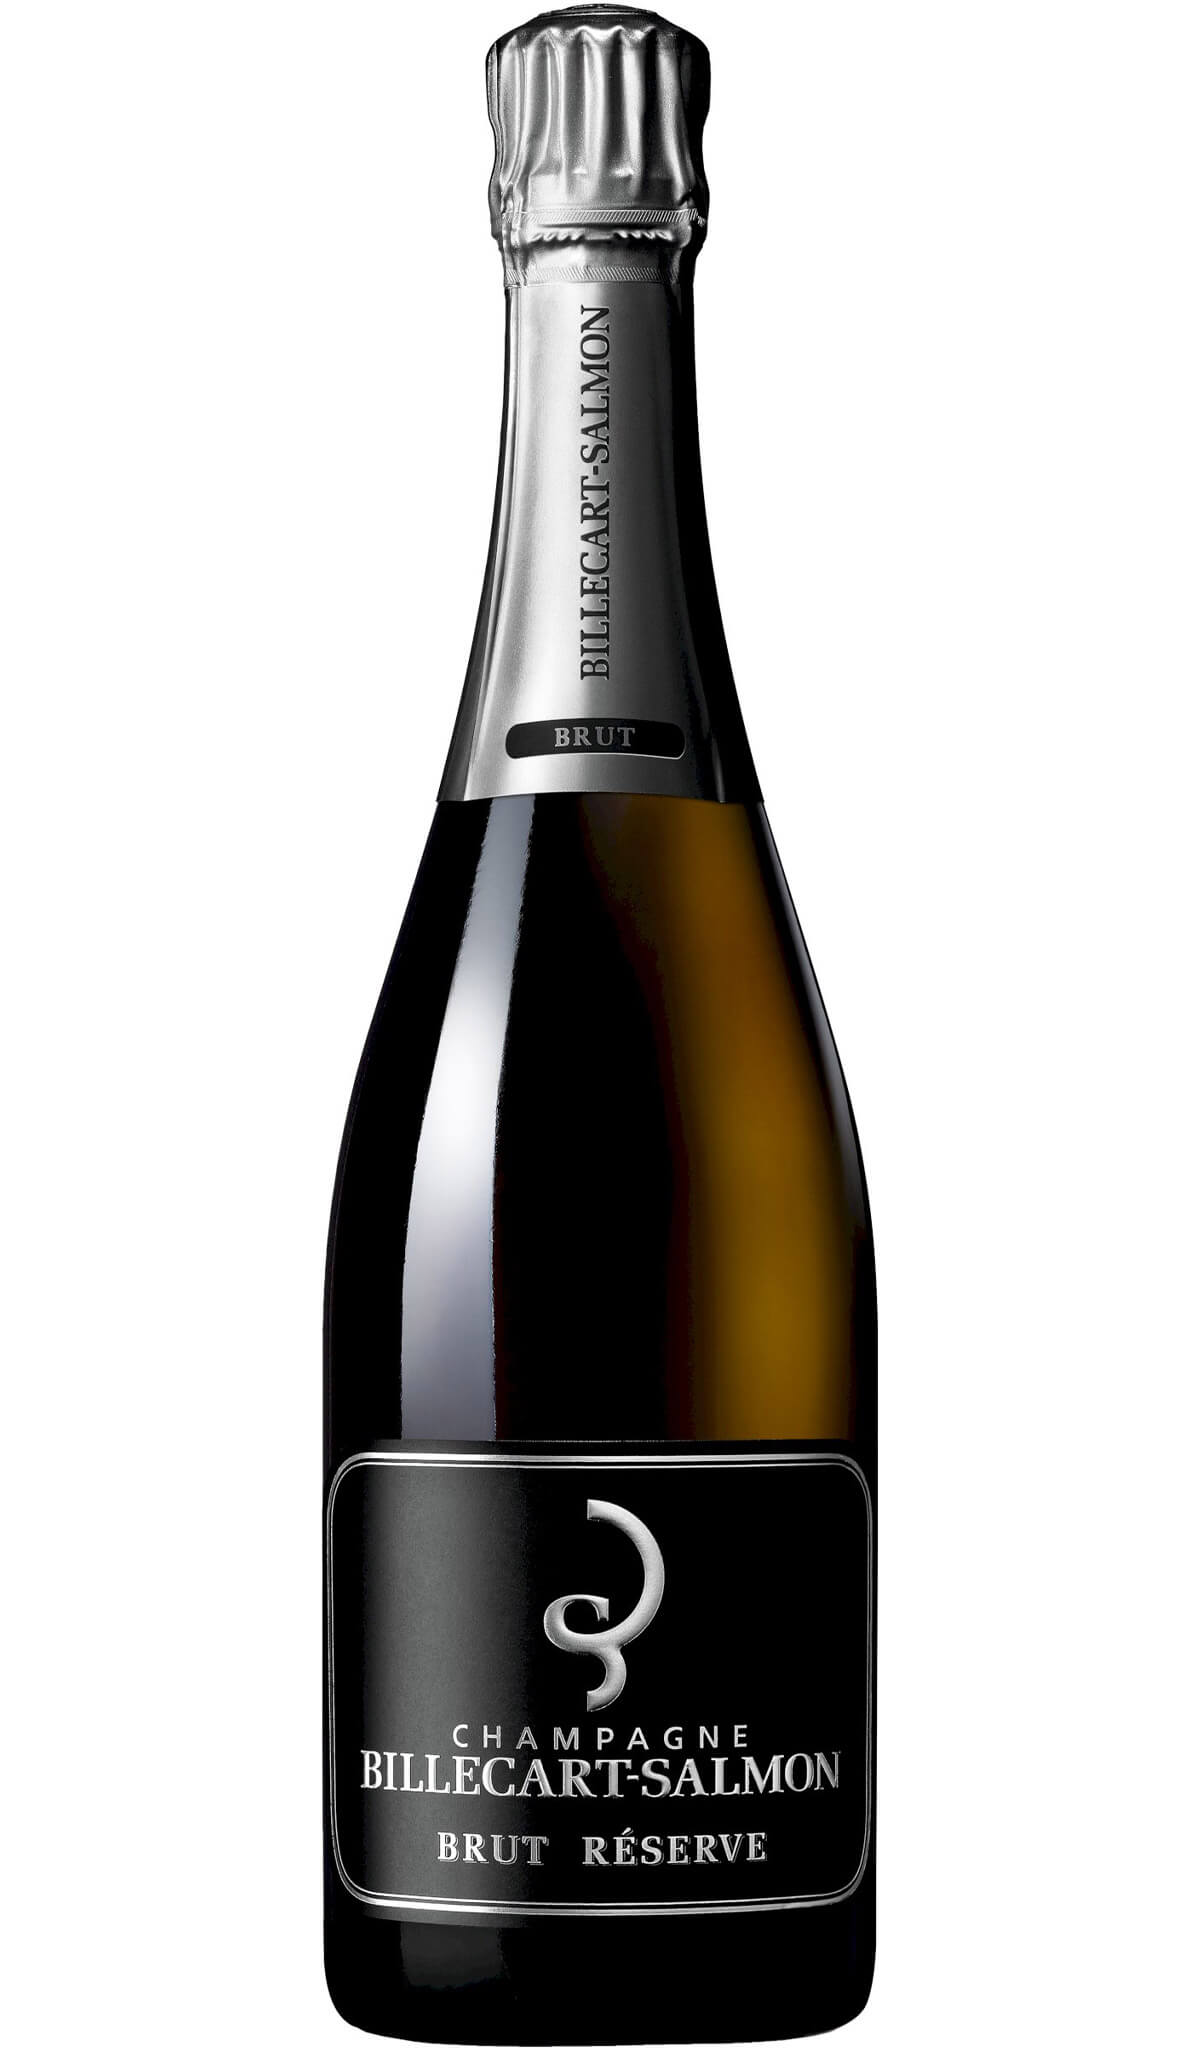 Find out more or purchase Billecart-Salmon Brut Réserve Champagne NV 750ml online at Wine Sellers Direct - Australia's independent liquor specialists.